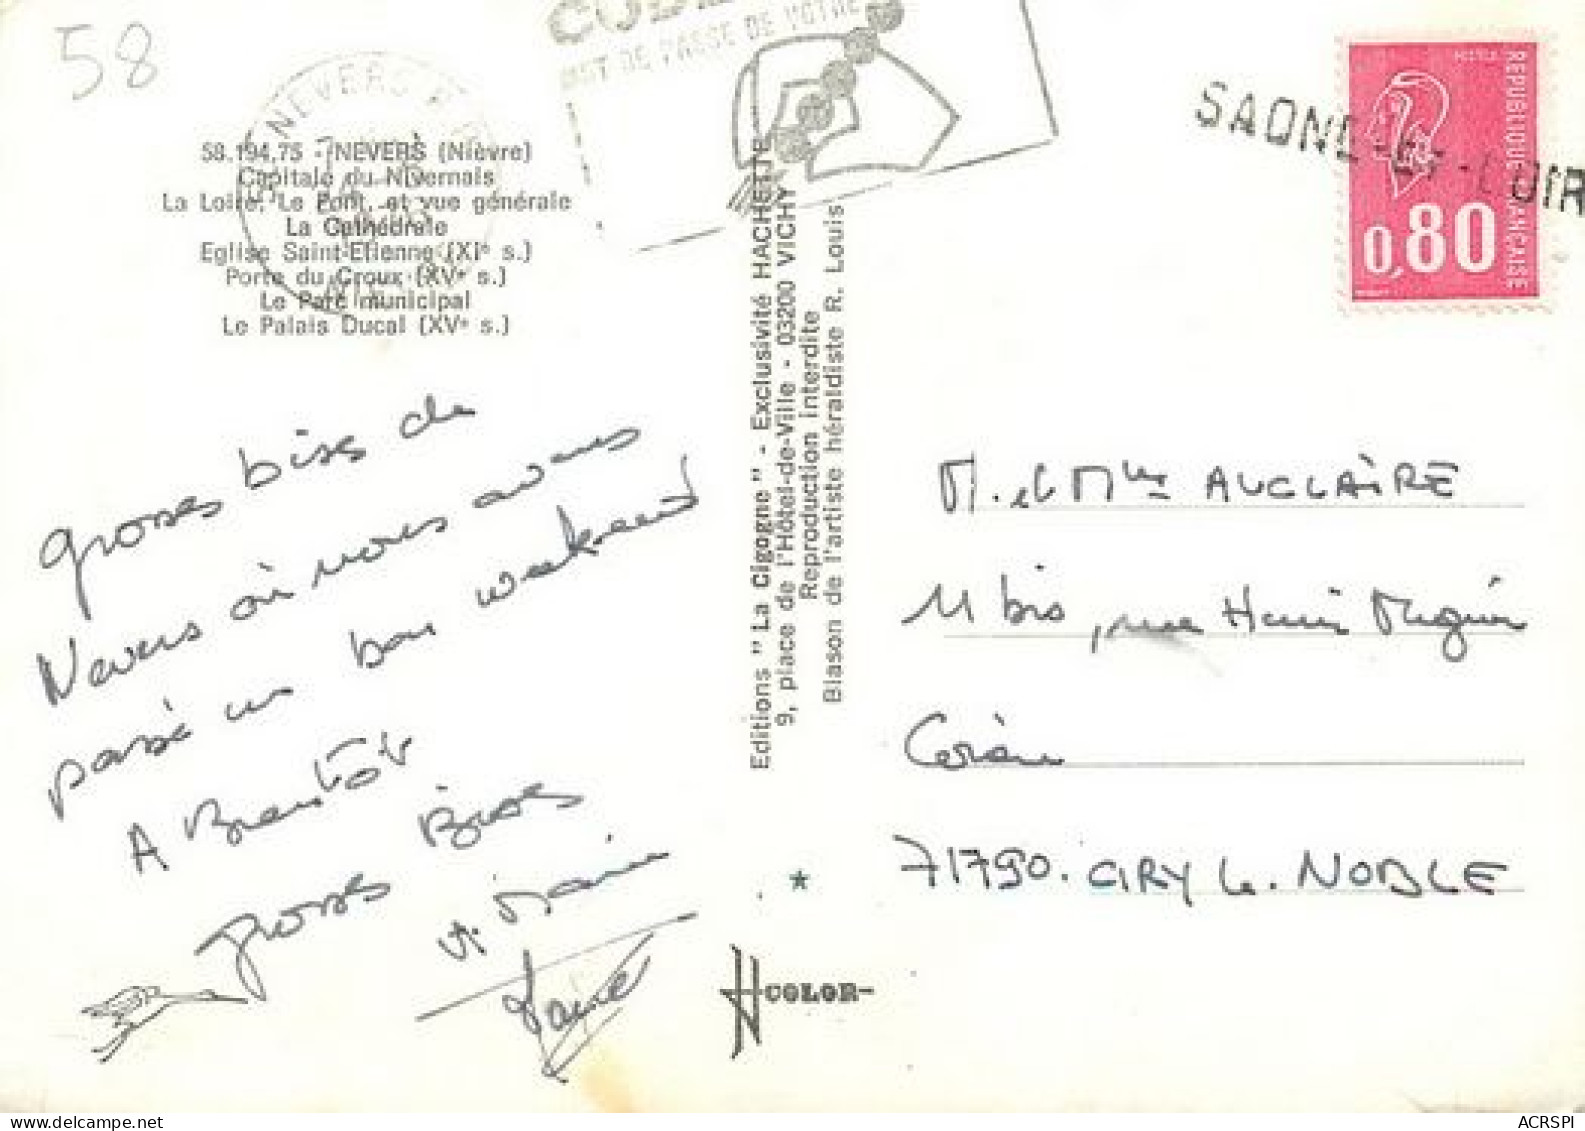  NEVERS  Multivue  3   (scan Recto-verso)MA2066Bis - Nevers